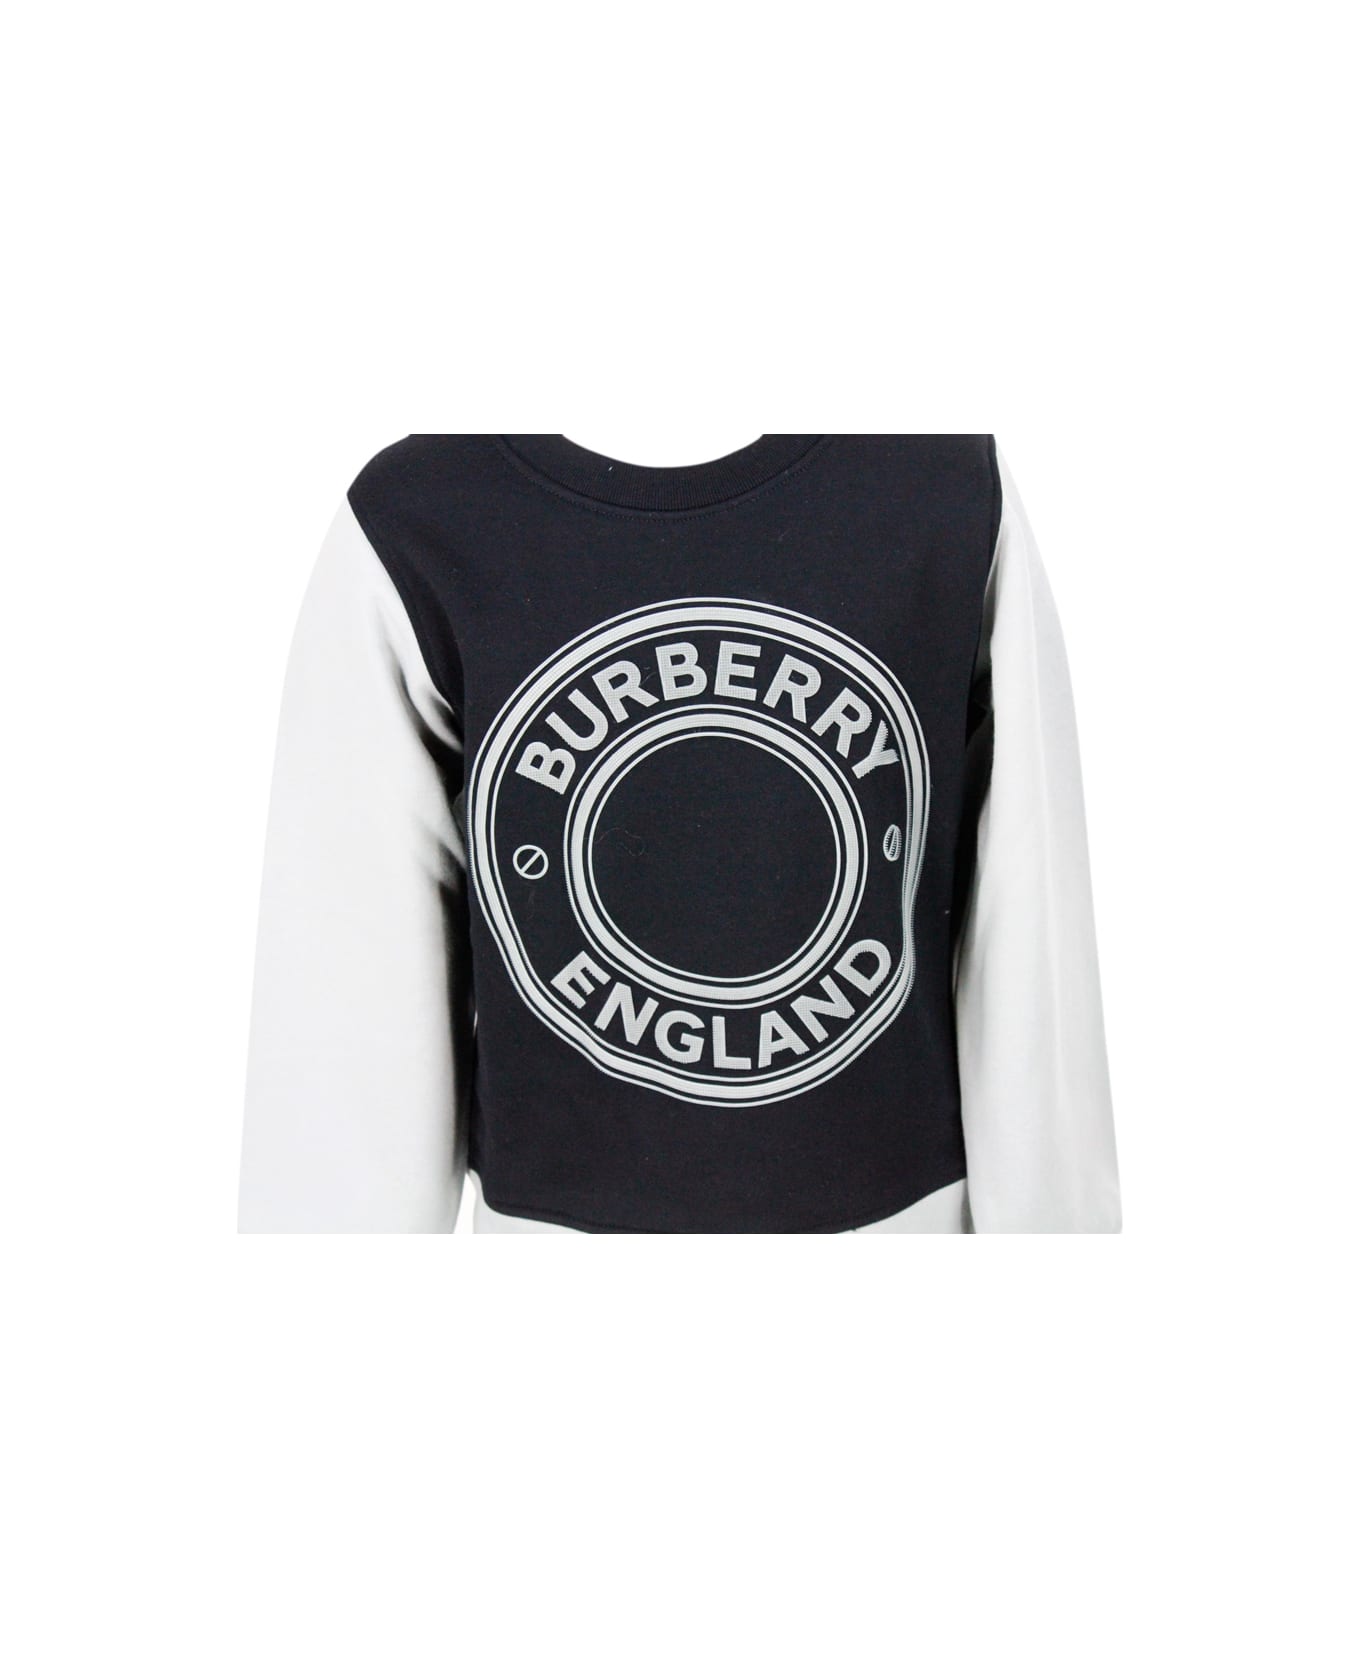 Burberry Cotton Crewneck Sweatshirt With Central Rubberized Logo In Relief With Sleeves And Bottom In Contrasting Colour - Black ニットウェア＆スウェットシャツ